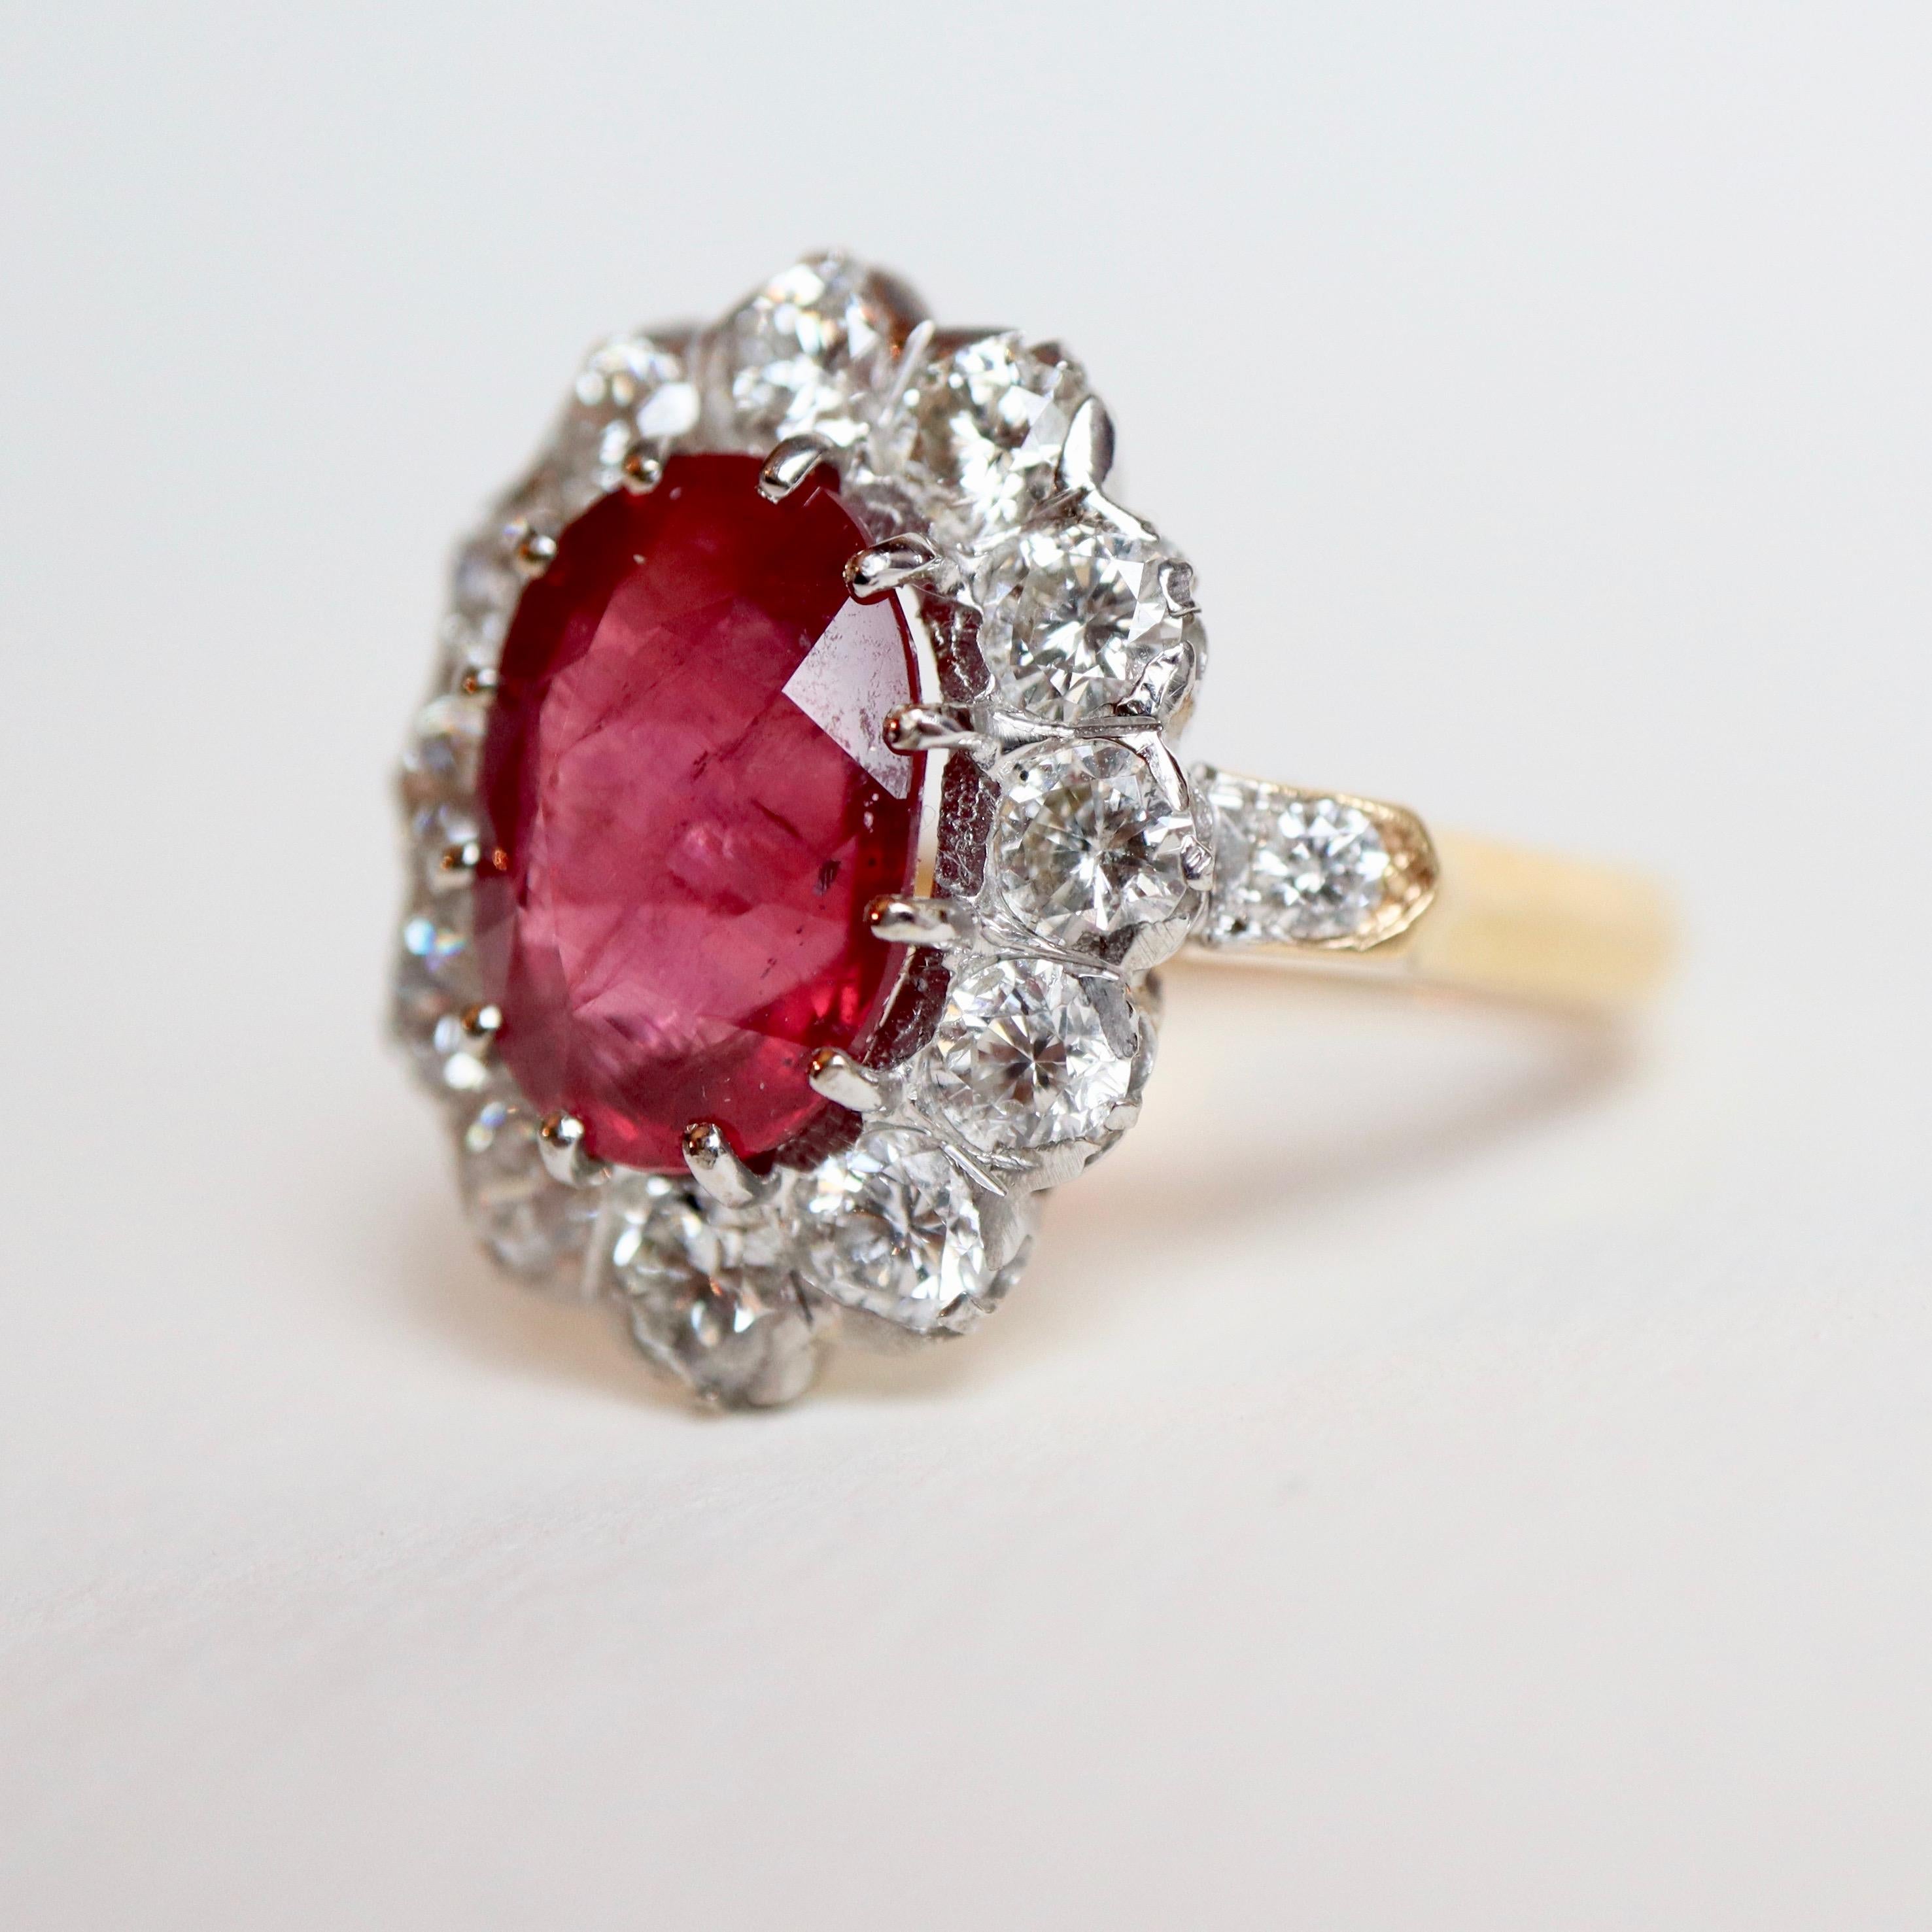 Pompadour model ring in 18K yellow and white gold, diamonds and 5.12K rubies
Pompadour model ring in 18K yellow and white gold setting in its center a large prong-set ruby weighing 5.12 carats surrounded by 12 diamonds of approximately 0.15 carats